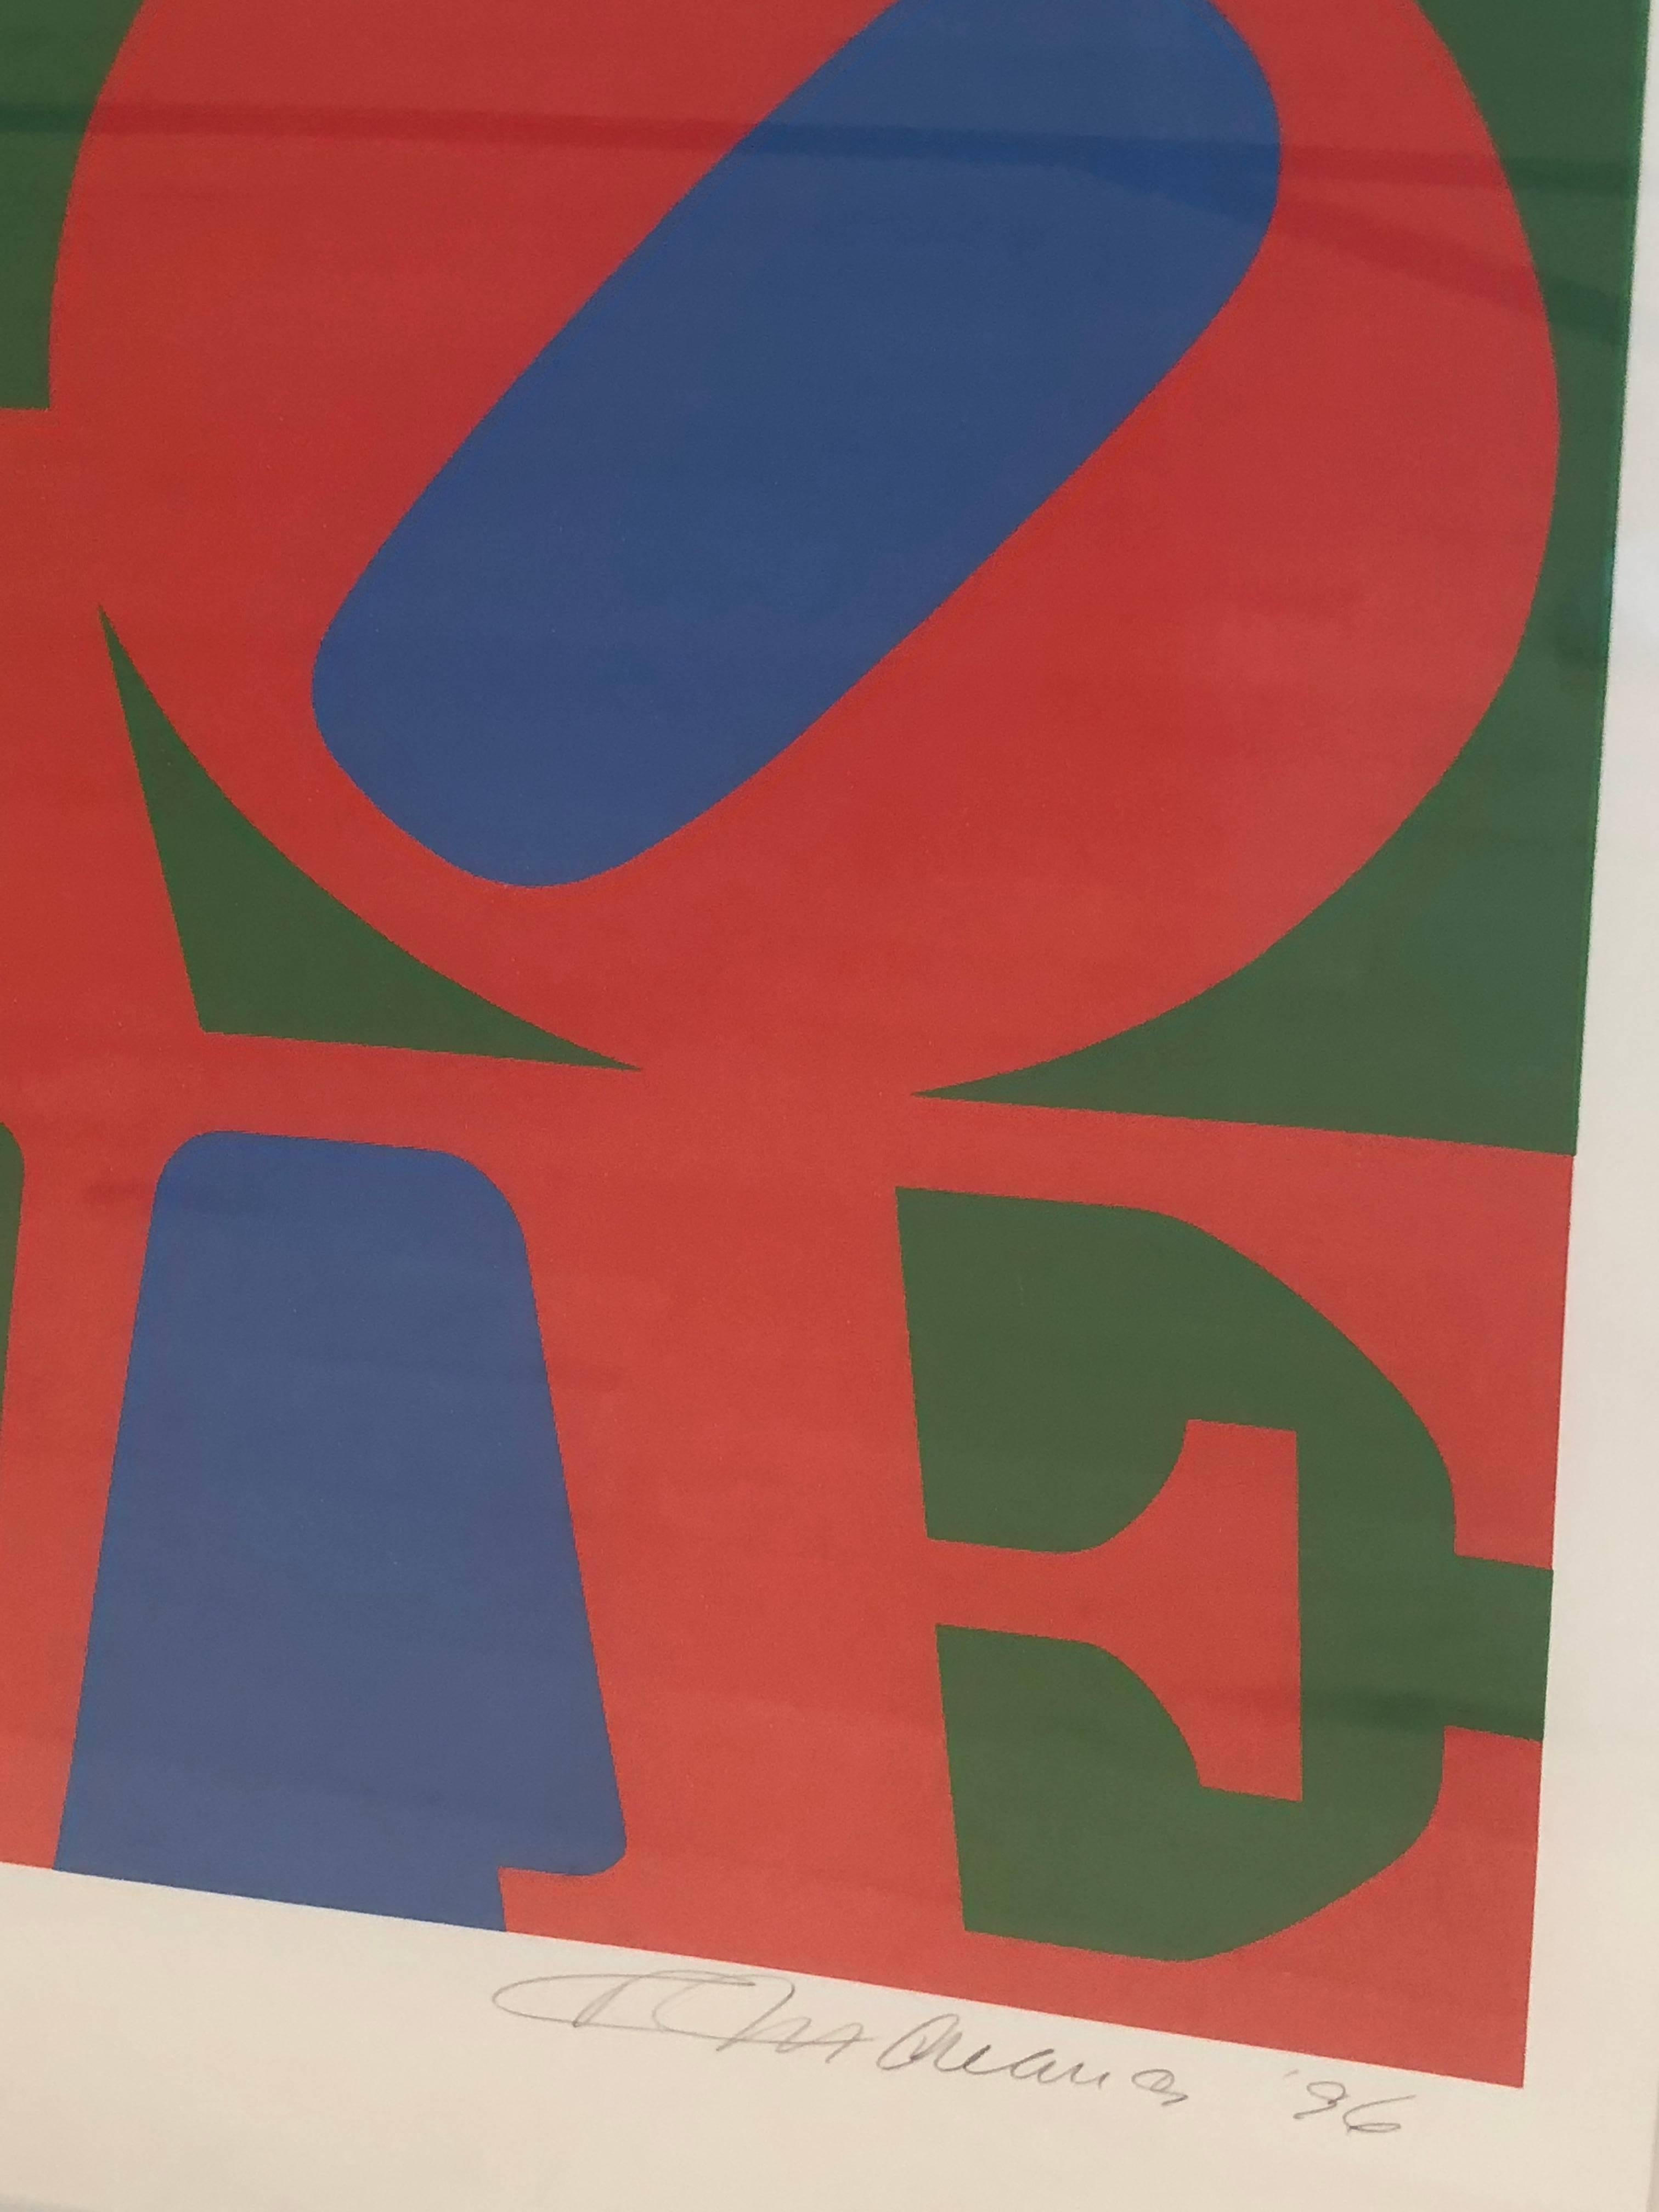 20th Century Pop Art Signed and Numbered Robert Indiana, LOVE, 1996 1